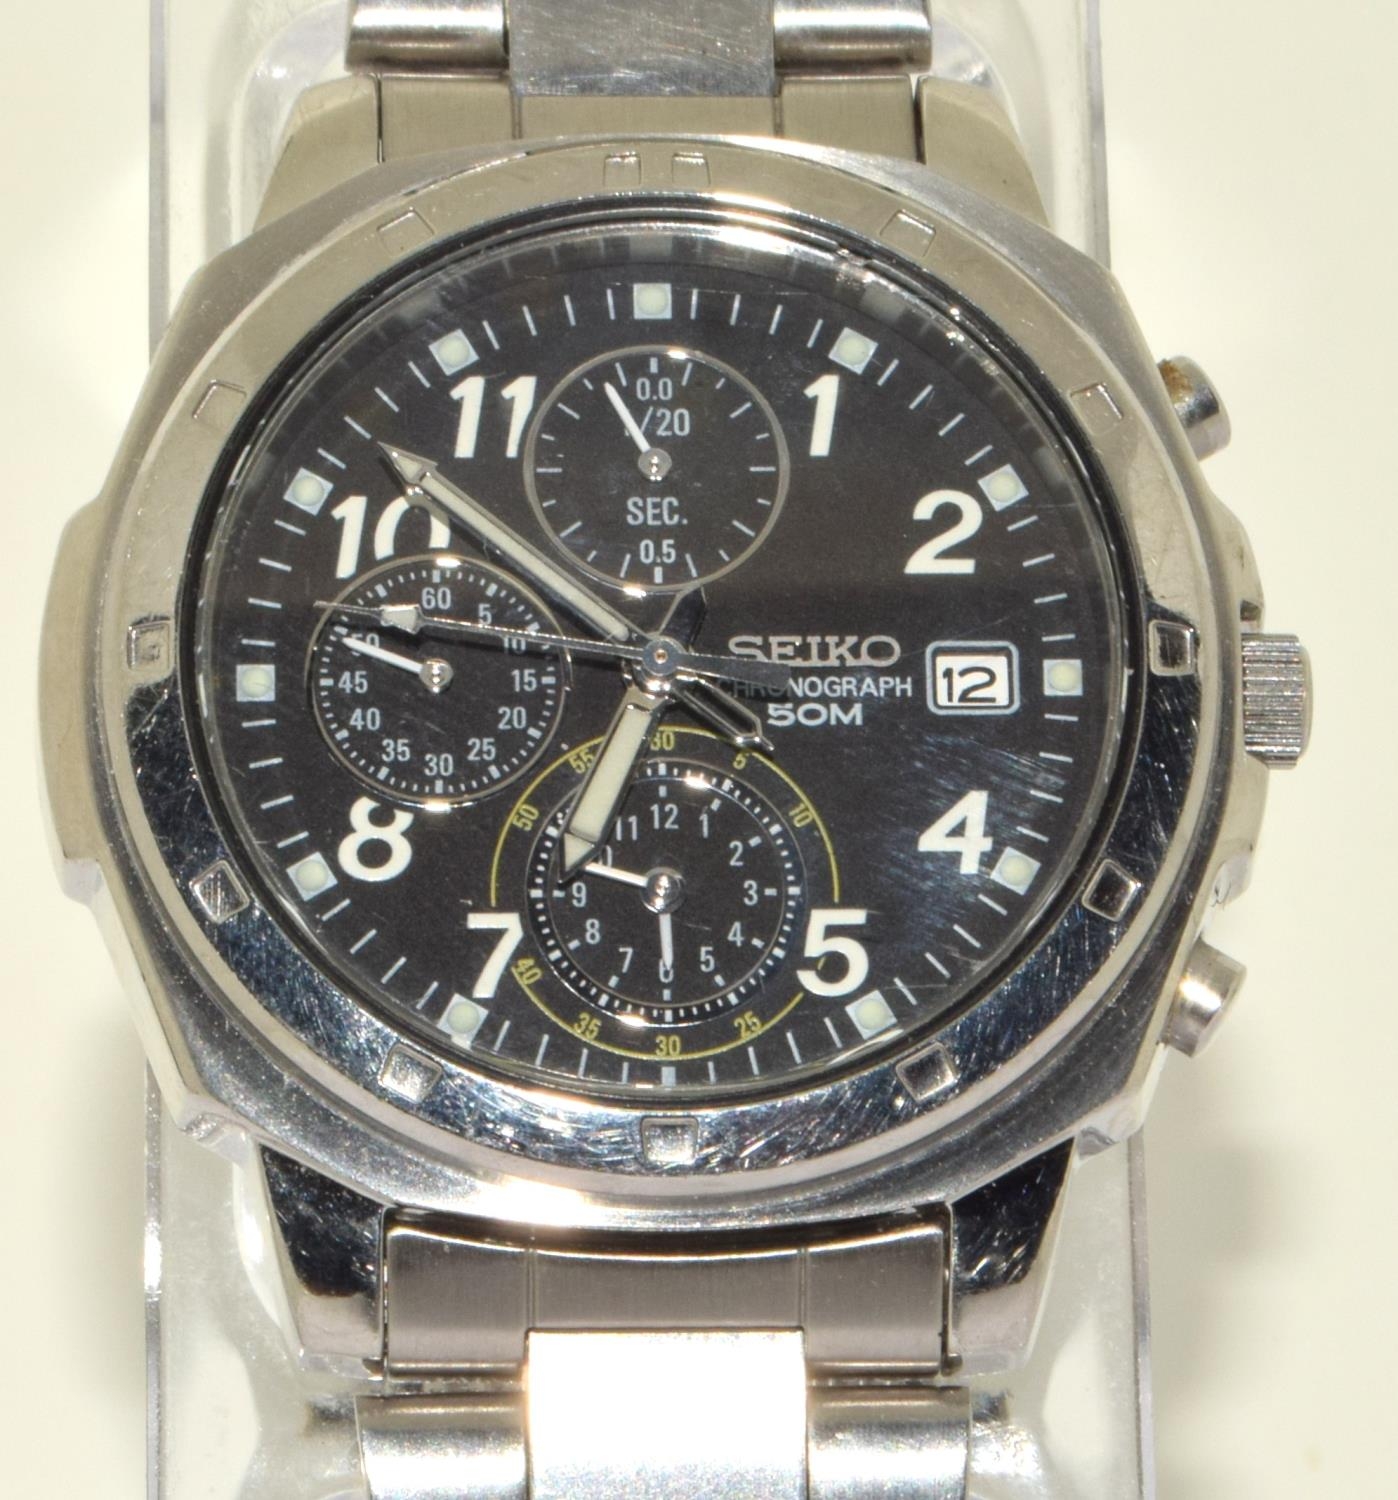 Seiko quartz Chronograph ref:7T92-0CA0 on stainless steel strap. Working when catalogued. (ref:14) - Image 2 of 6